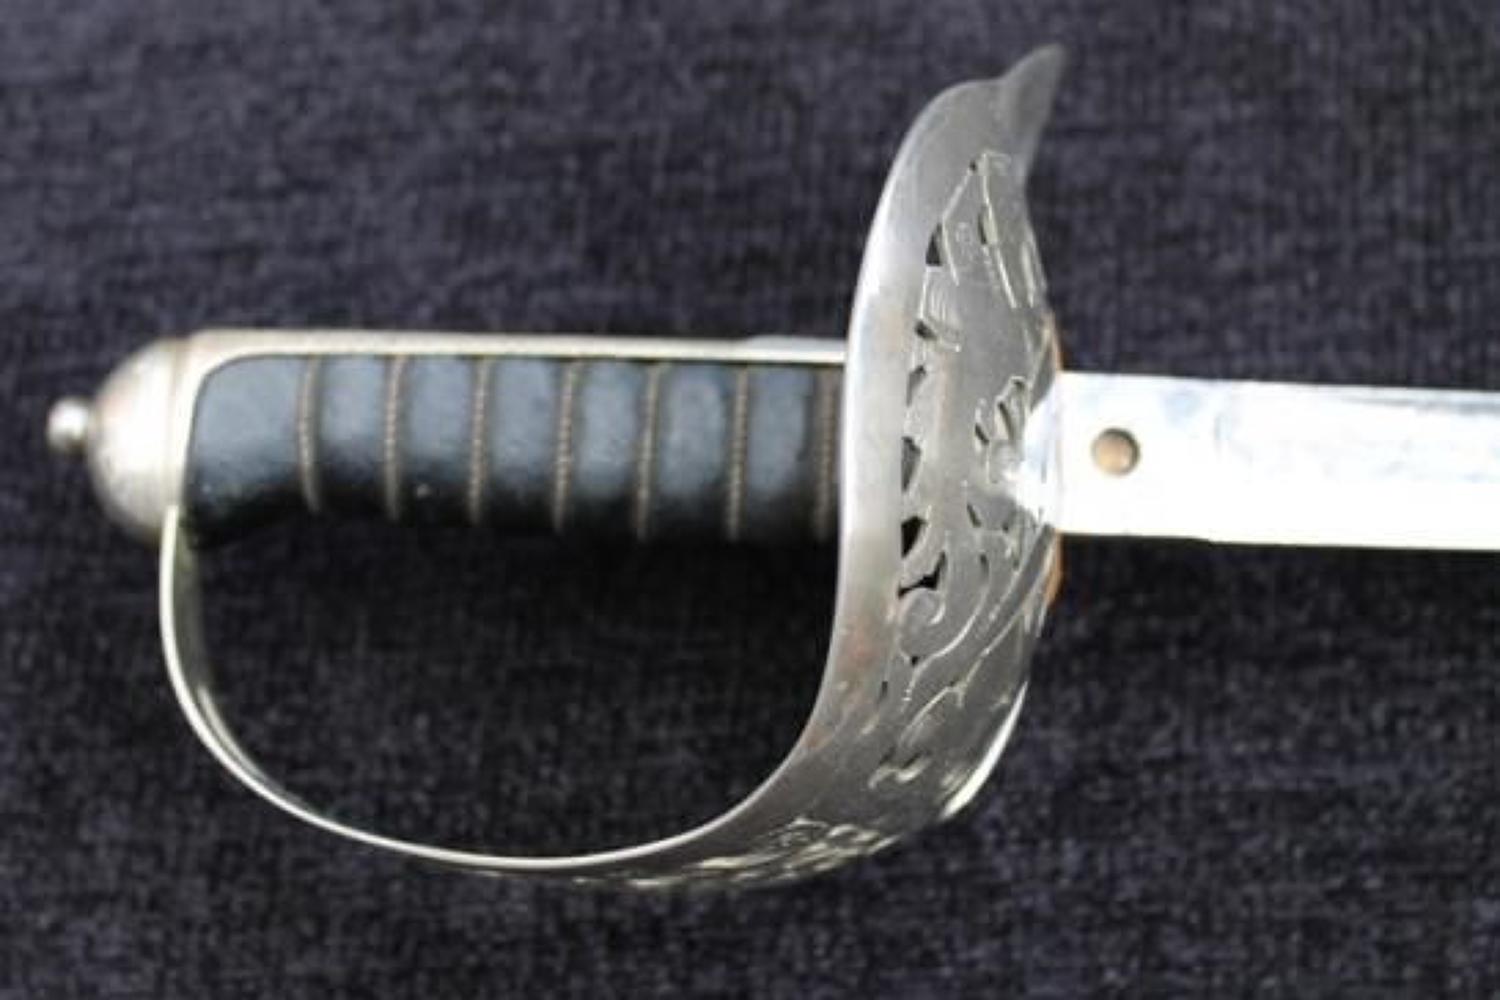 Attributed Royal Engineer's Officers Sword